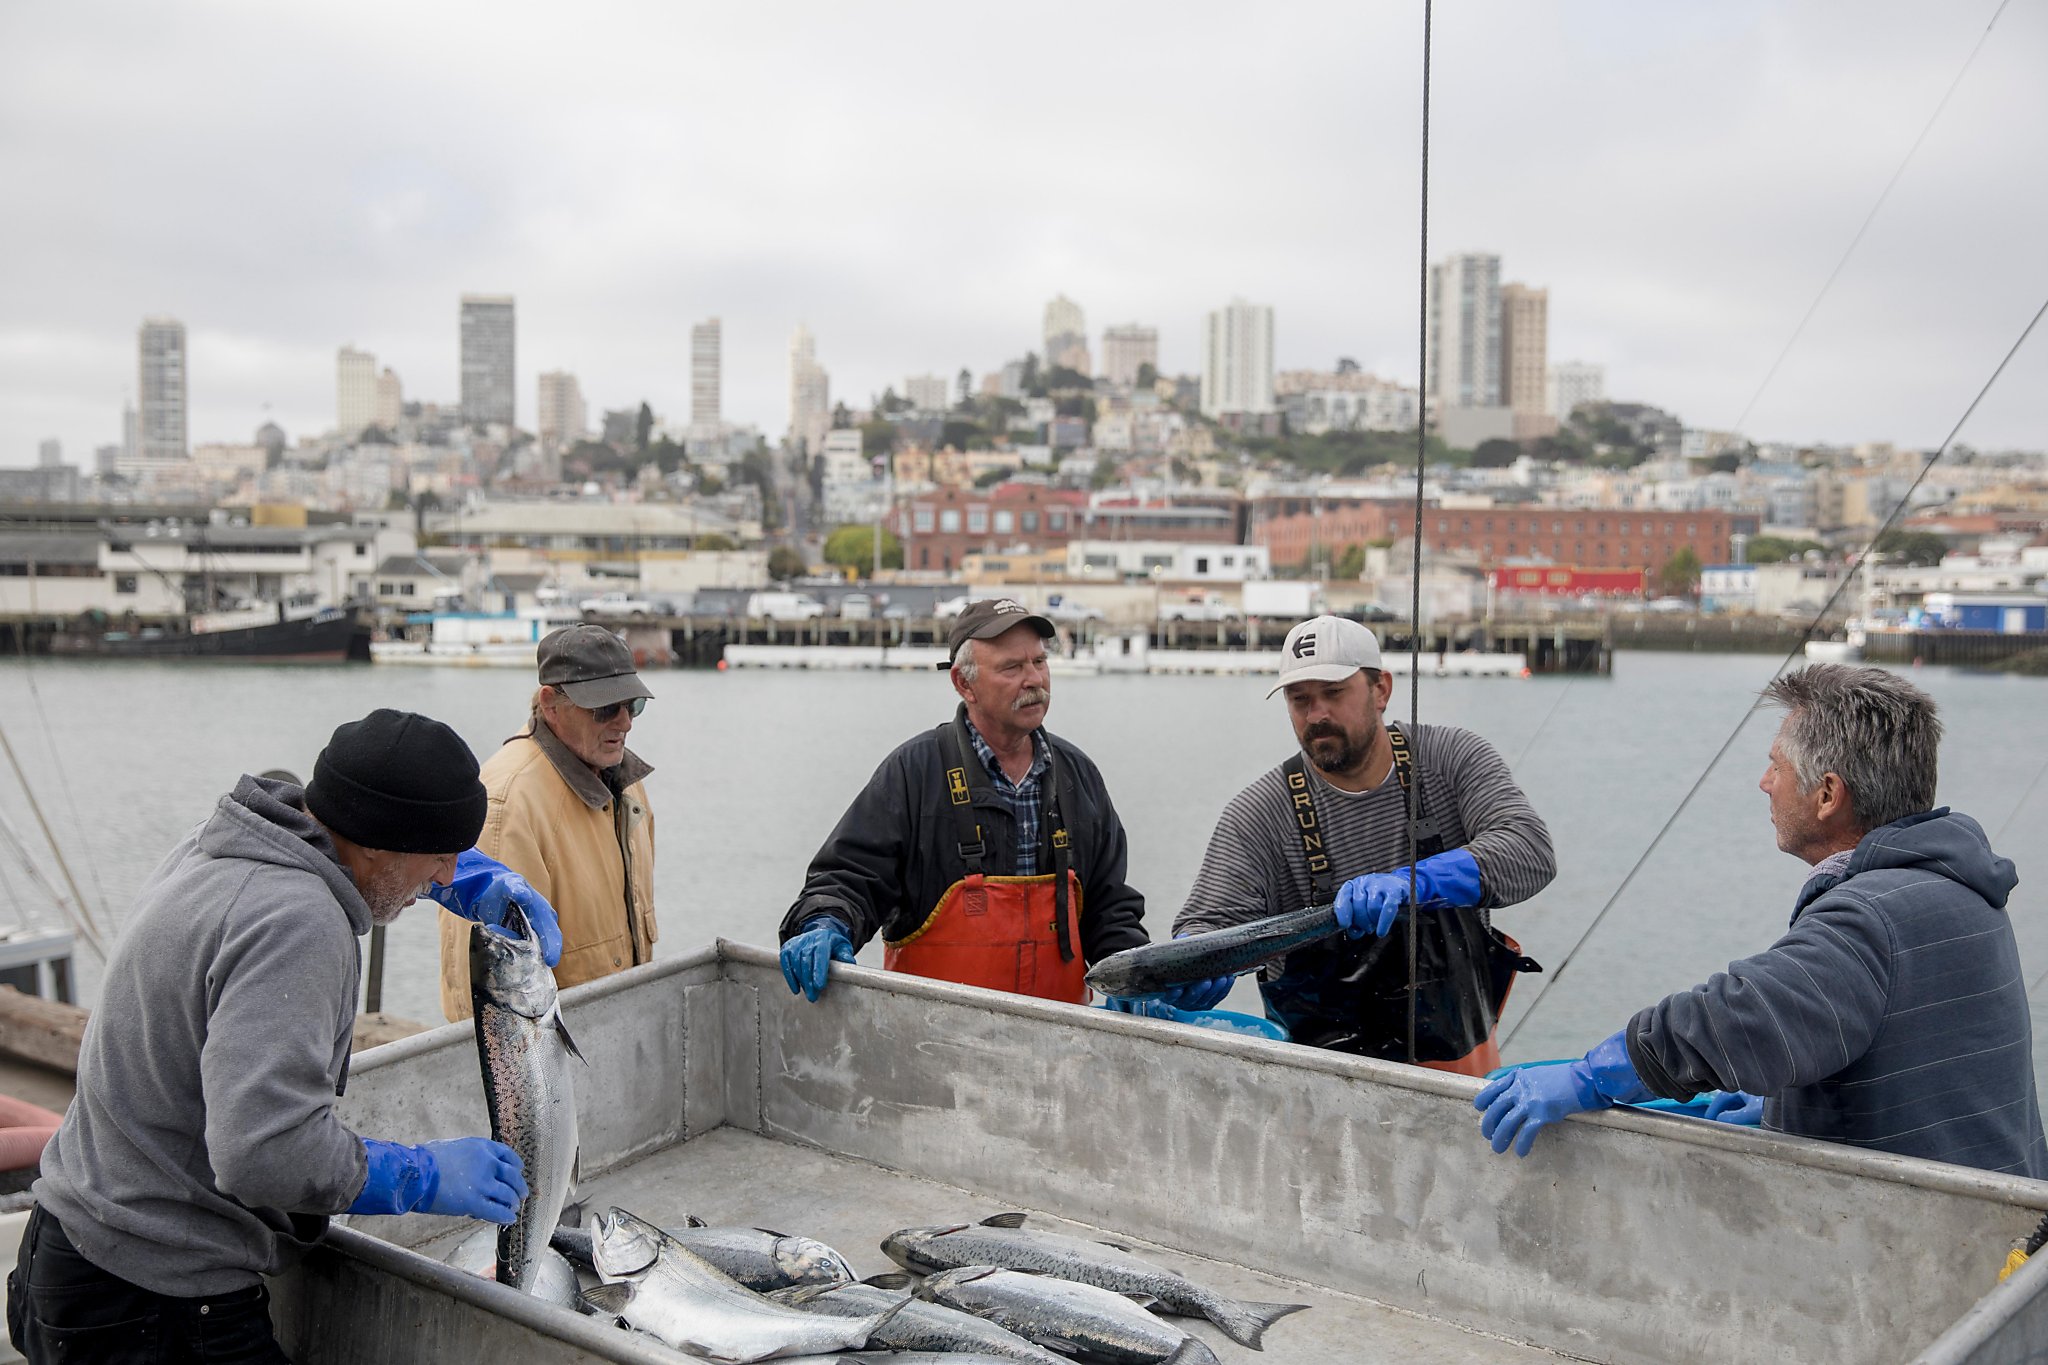 Bay Area salmon season is expected to be much shorter this year